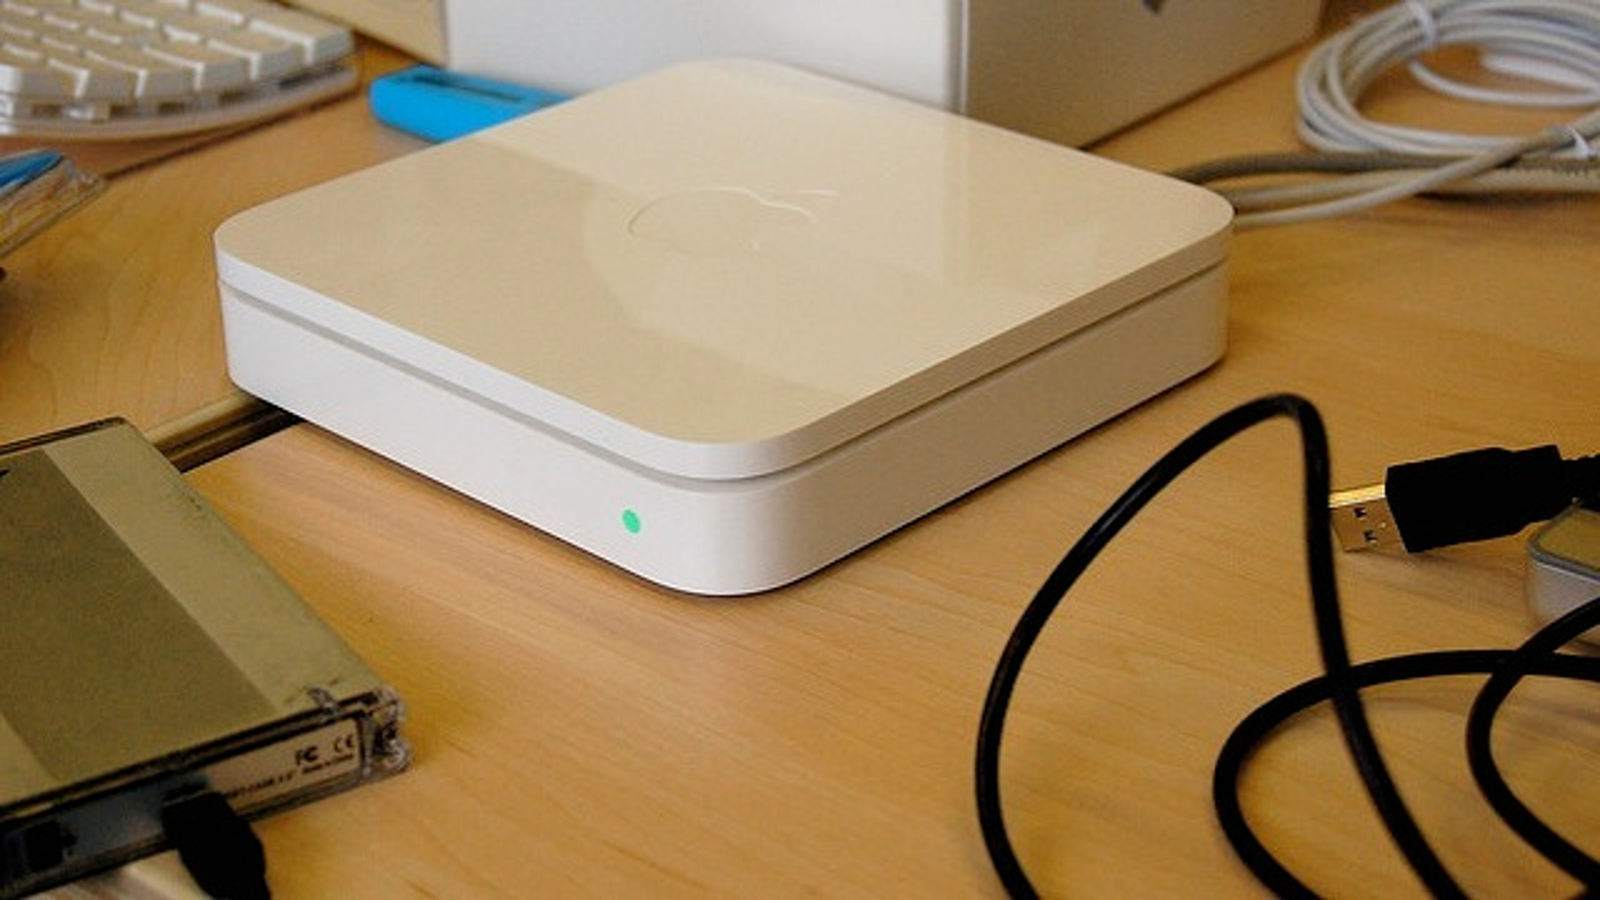 apple airport express setup with comcast